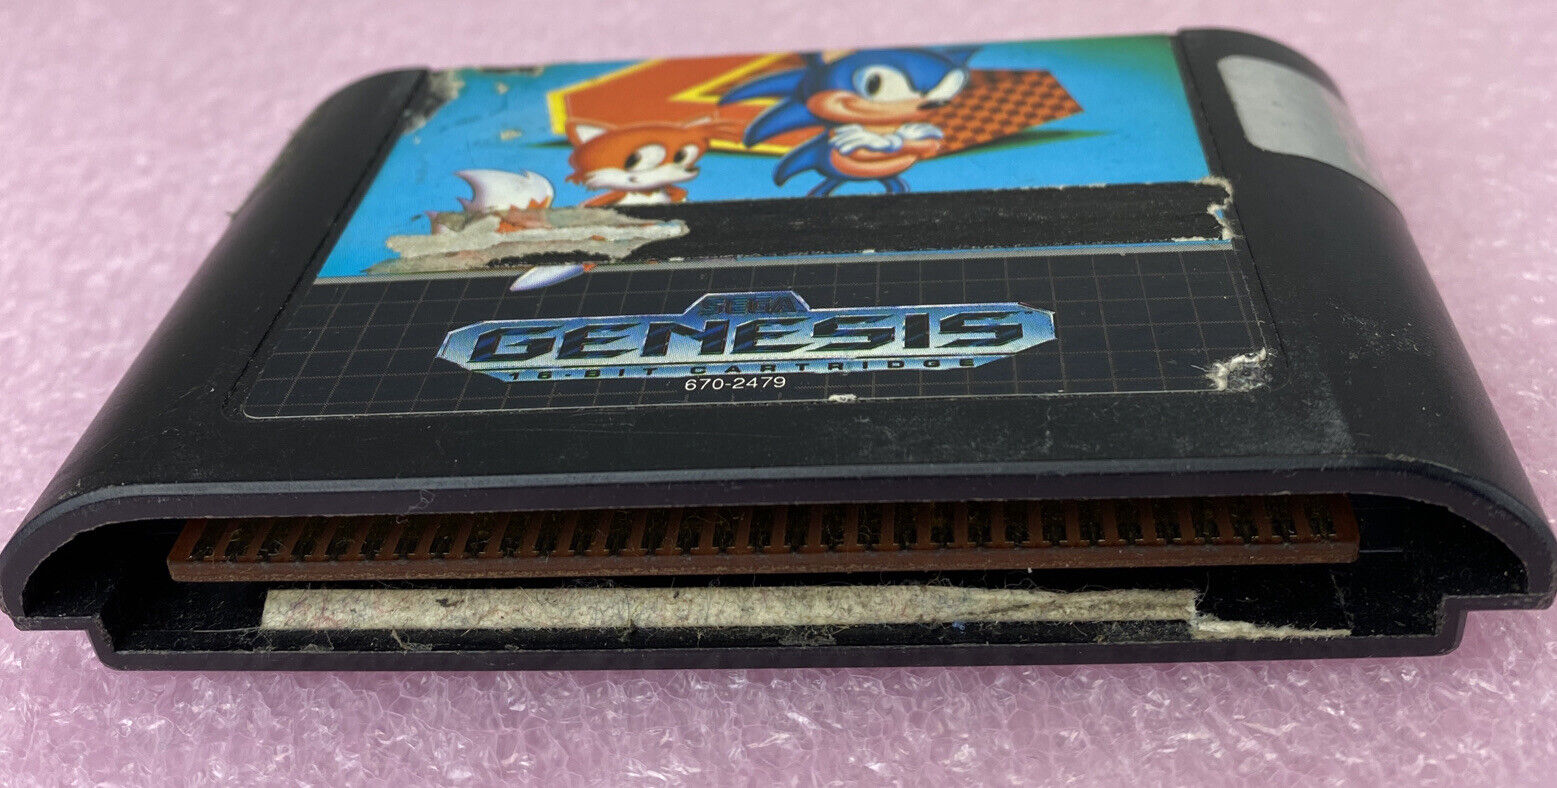 Sonic The Hedgehog (Cart Only) from Sega - Game Gear